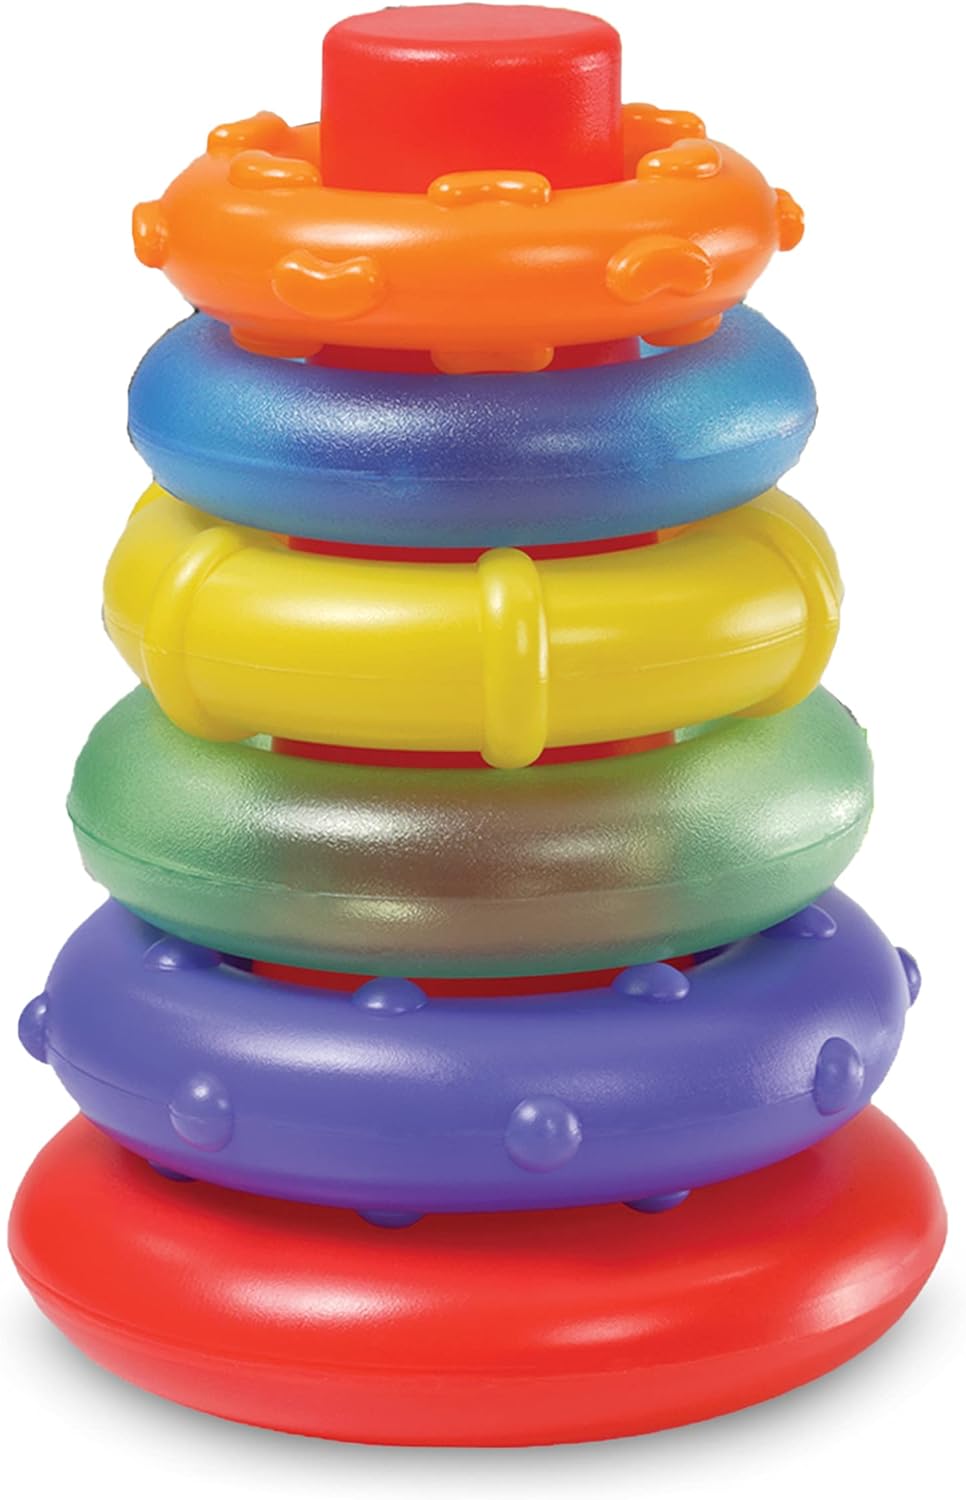 EZONEDEAL Toys Tall Teddy Stacking Toy With 7 Colorful Rings For Baby To  Grasp, Shake, And Stack Multicolored Teddy Stacking For Kids Age 6 Months  And Older | Coquitlam Centre